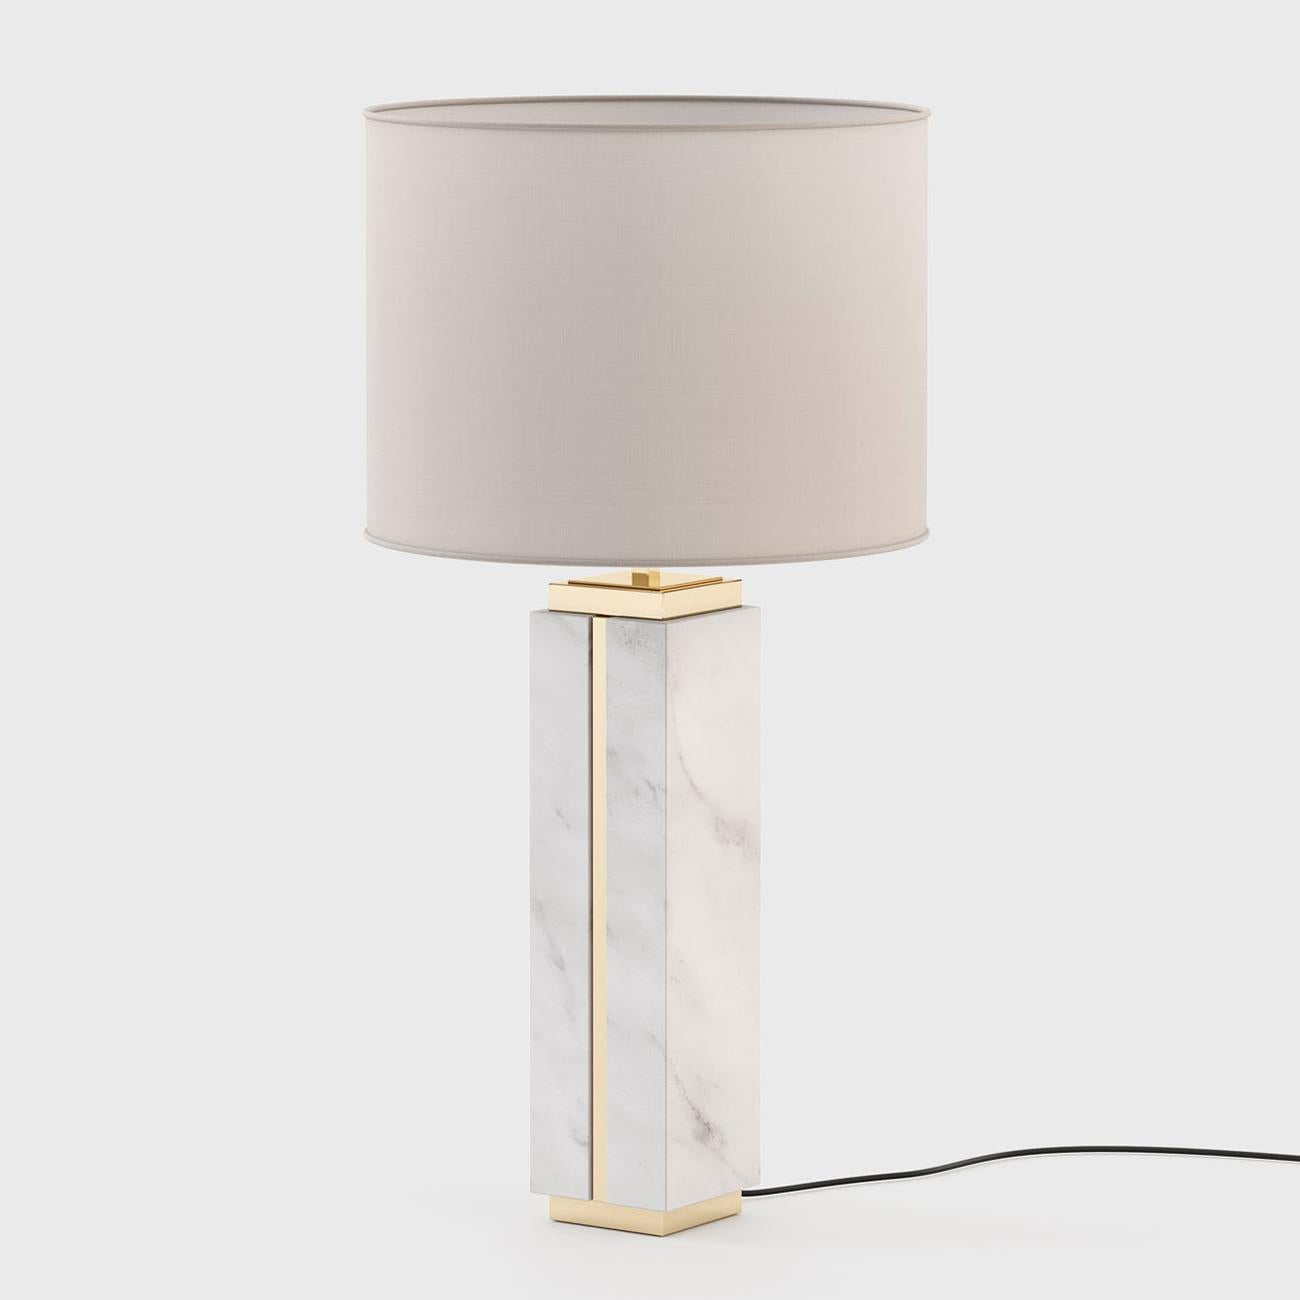 Table lamp Empire white marble with solid white
marble base and with polished stainless steel in 
gold finish. Including a white coton shade. 1 bulb, 
lamp holder type E27, max 40 Watt. Bulb not 
included. Base: 15cm x 15cm.